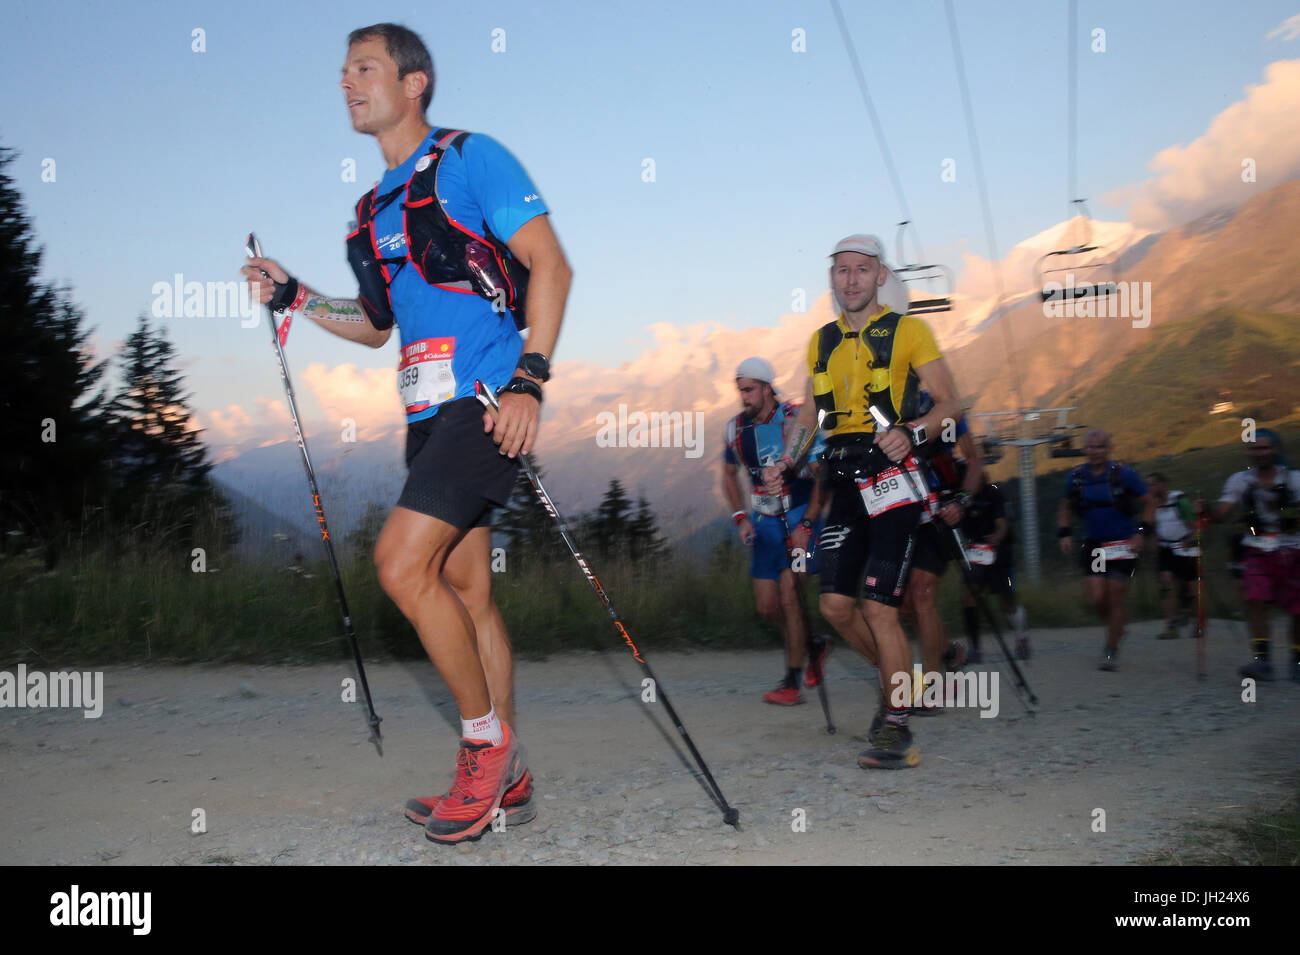 The Ultra-Trail du Mont-Blanc. A a single-stage mountain ultramarathon in the Alps. France. Stock Photo